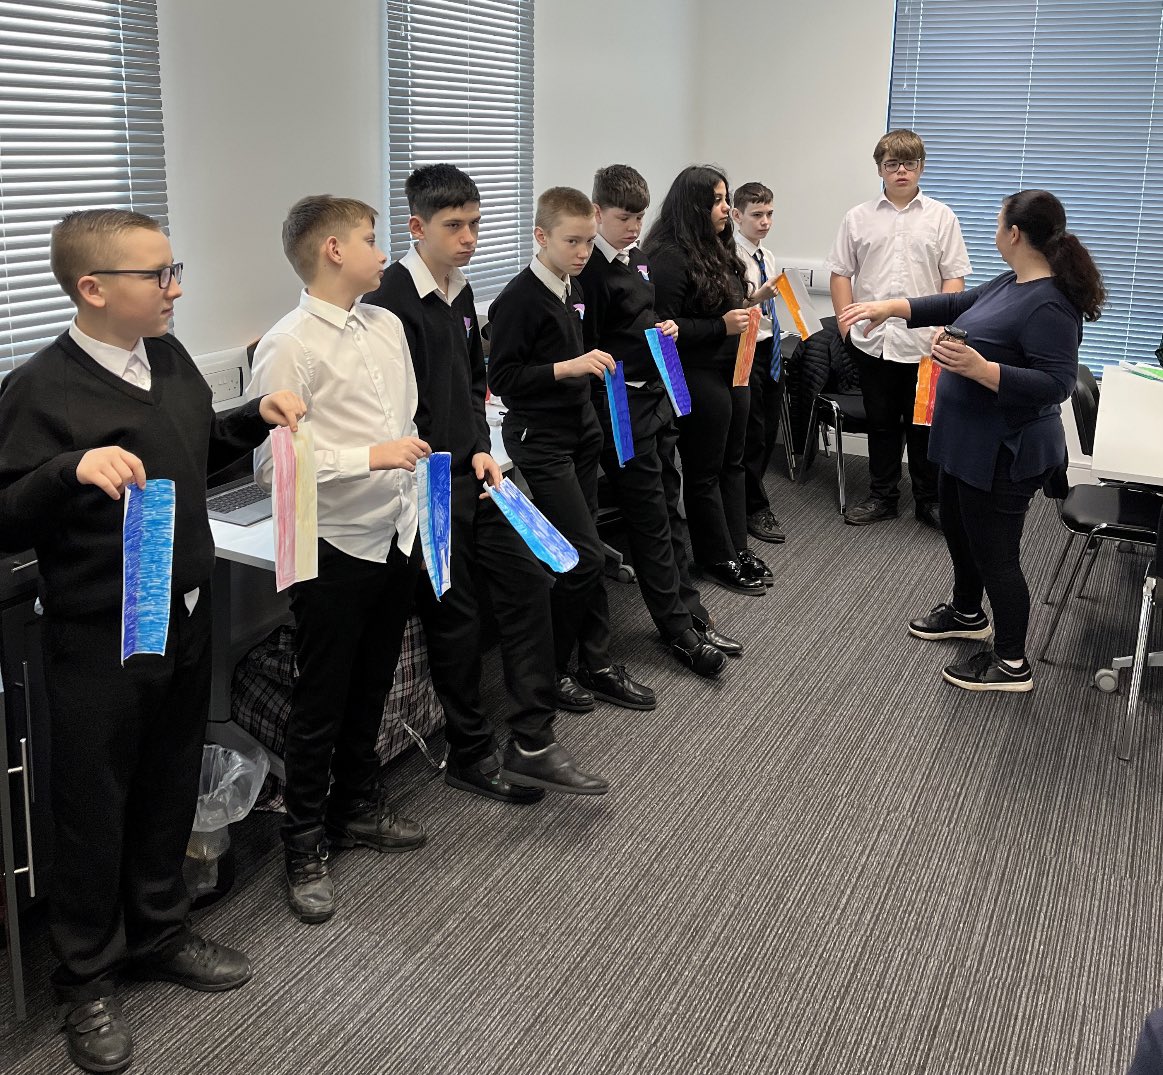 Year 7 and 8 visited the Space STEM workshop where they learned about renewable energy and how Middlesbrough is creating career choices in this field. #thisisap #careers #currency